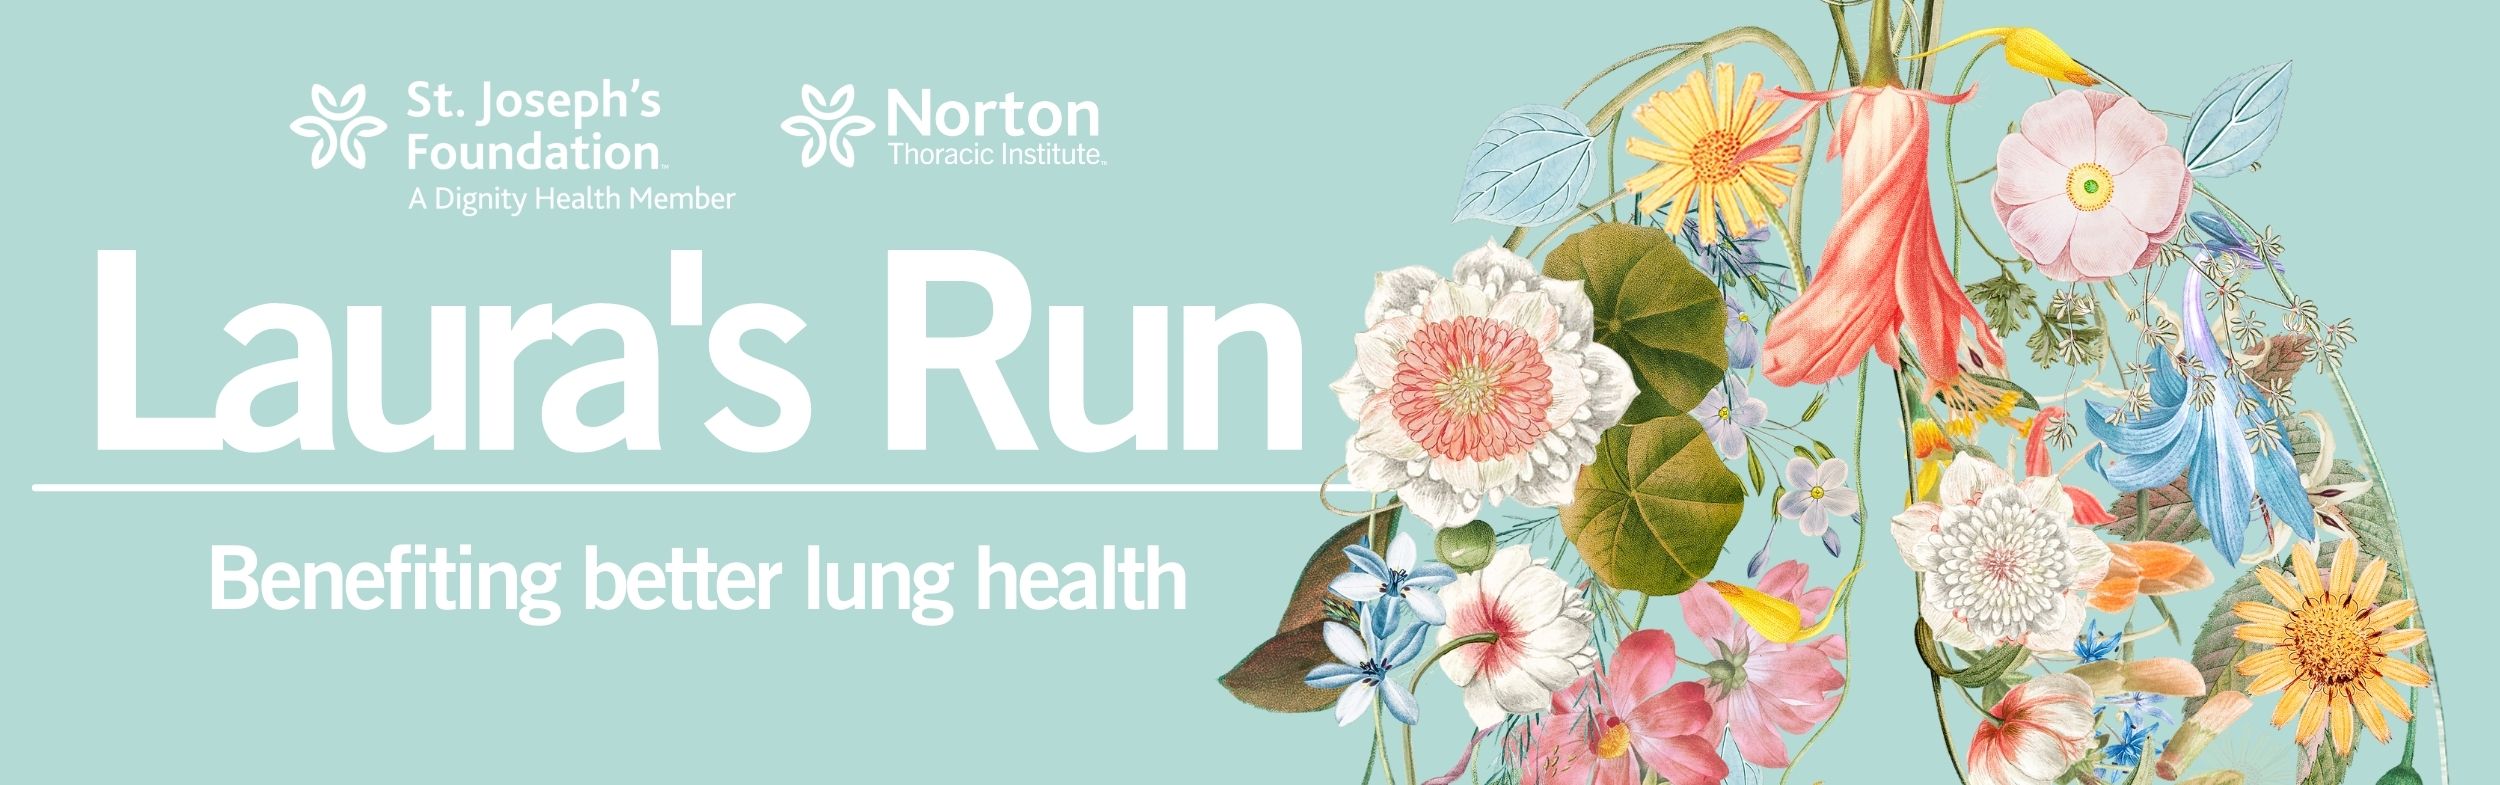 Graphic for Laura's run with flowers depicting lungs